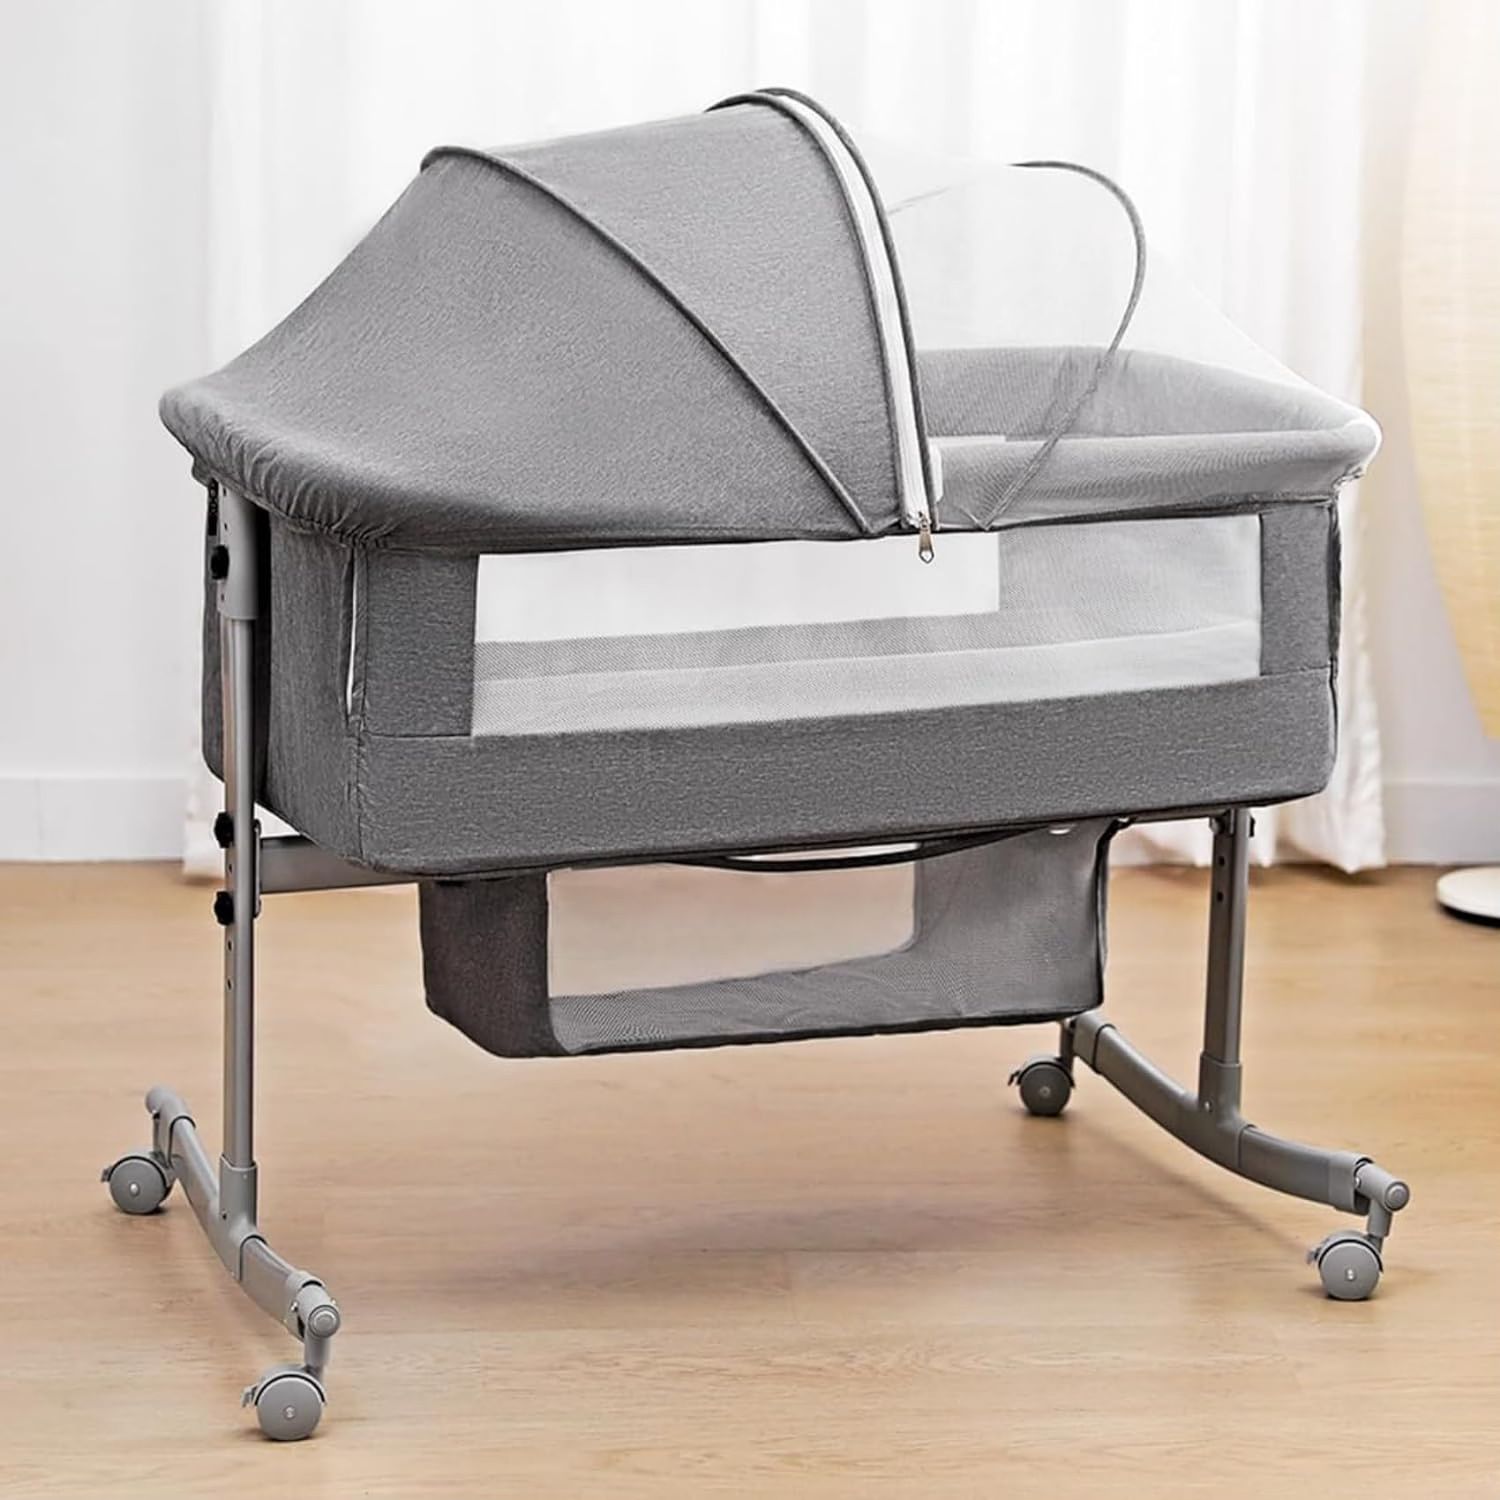 Bedside Crib for Baby, 3 in 1 Bassinet with Large Curvature Cradle